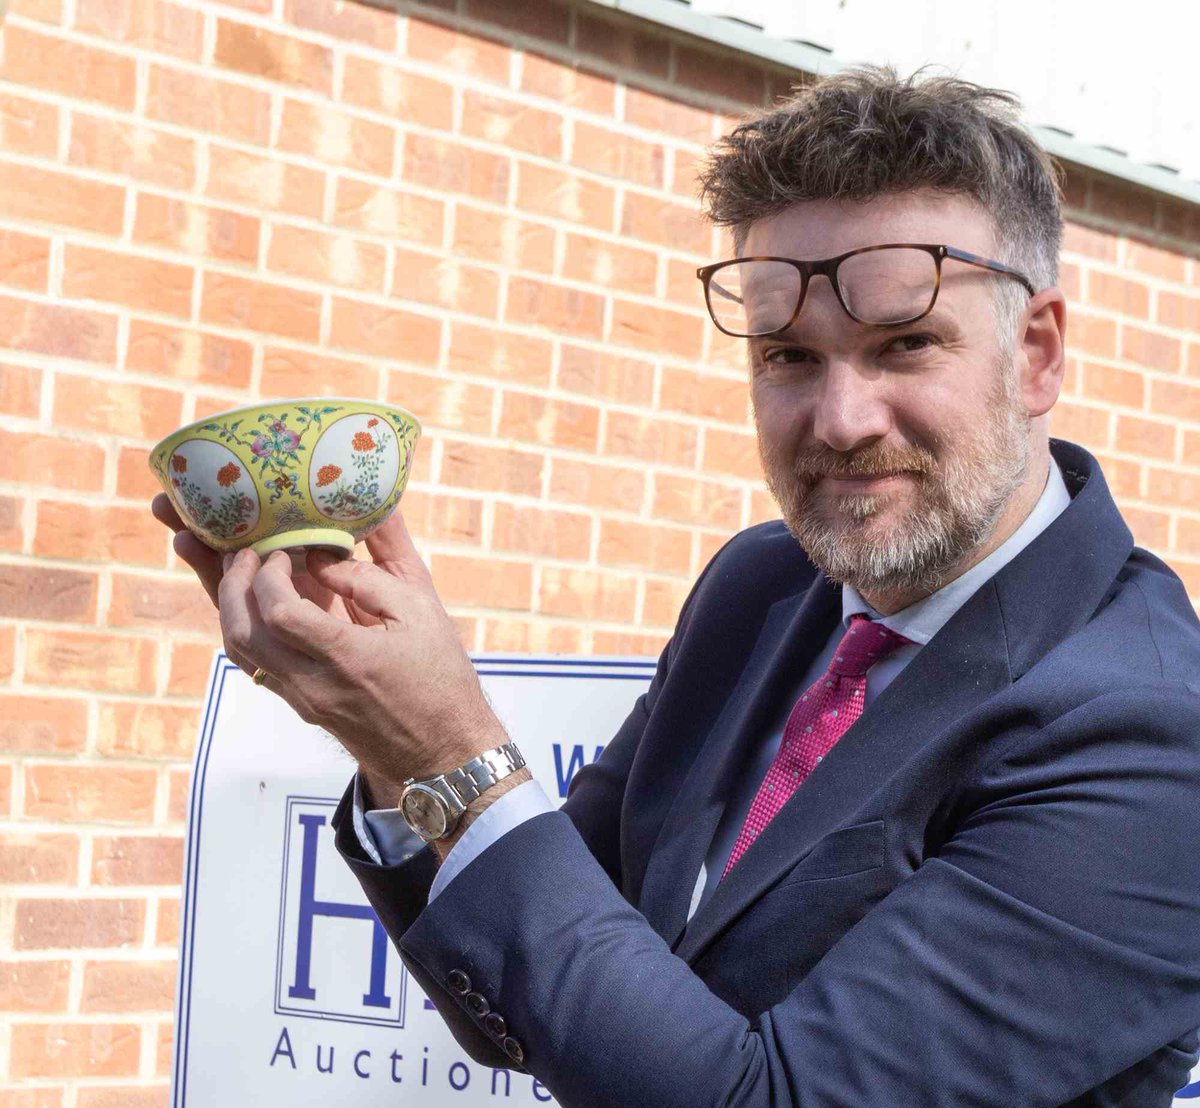 📣 SUTTON COLDFIELD | THIS FRIDAY! Pop along and meet with Charles Hanson for FREE valuations of your treasures! 💍💎Silver, watches, jewellery or antiques? 🕰️ 2pm - 4pm at Moor Hall Hotel 📍Moor Hall Hotel, Four Oaks, Moor Hall Dr, Sutton Coldfield B75 6LN @HansonsAuctions